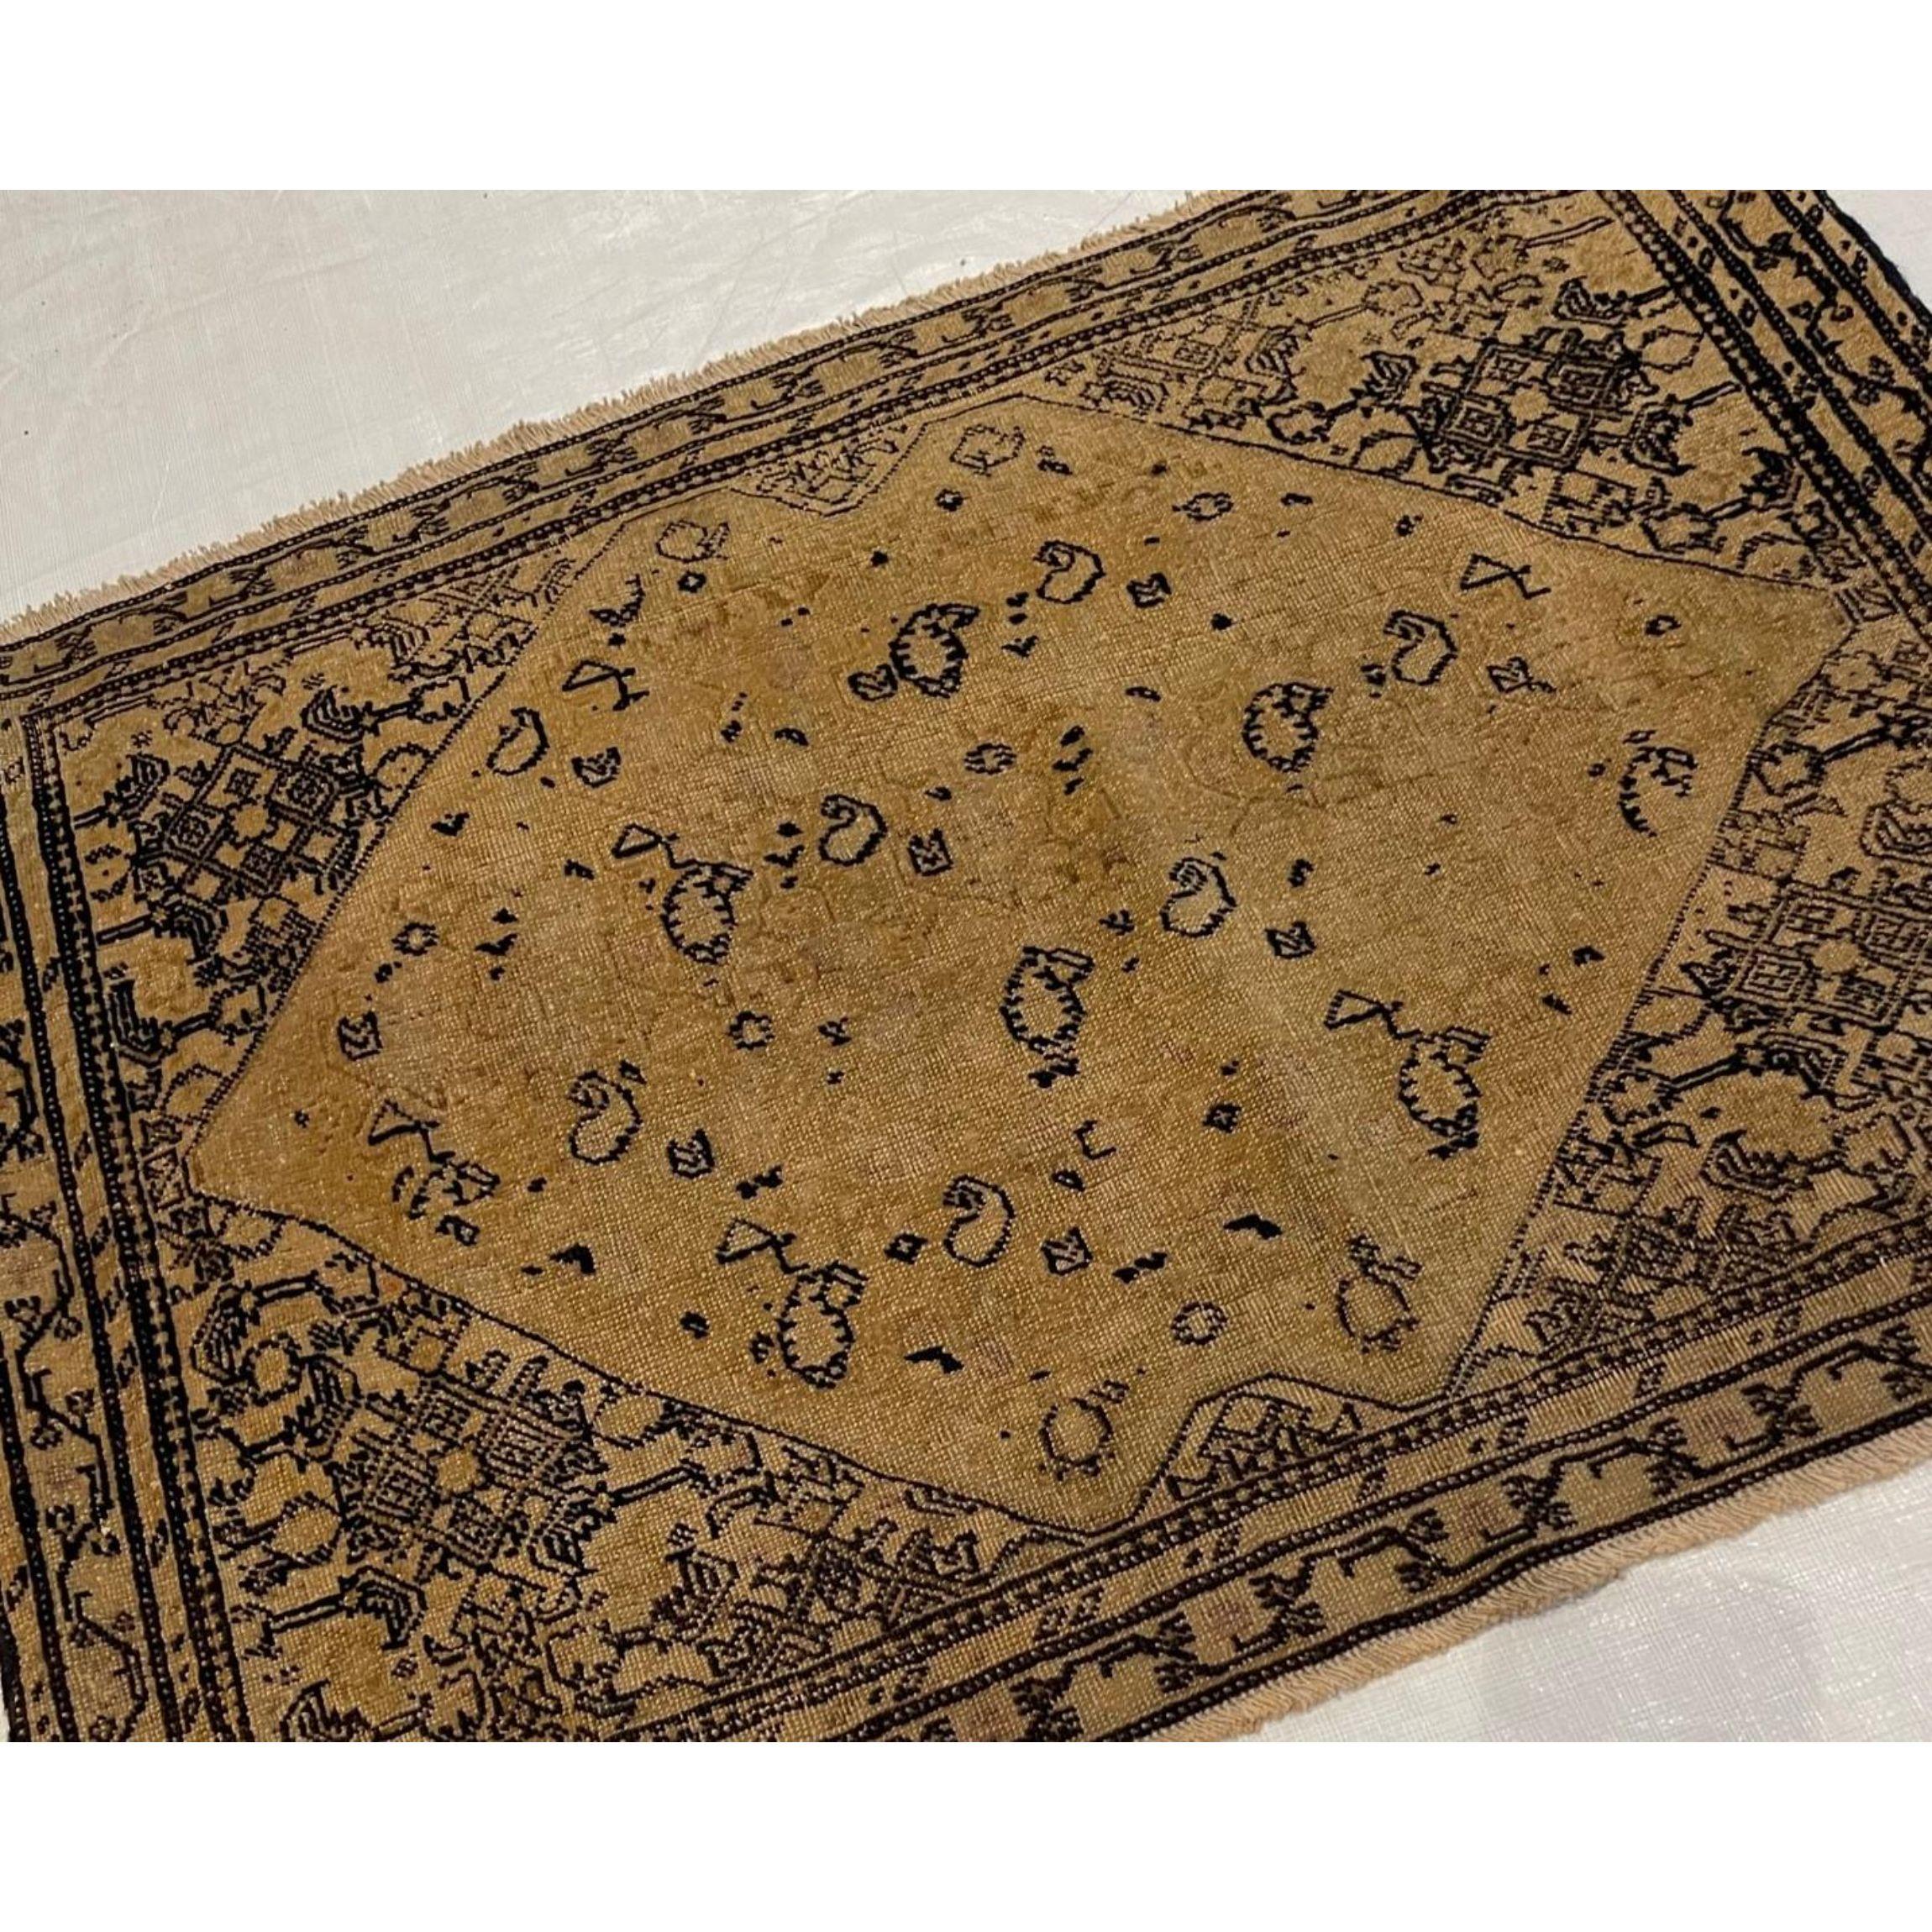 Persian Farahan Sarouk rugs were woven in the village of Sarouk but these carpets given the name “Farahan” as a distinction for their exceptional type of Sarouks. The Persian Farahan Sarouk rugs were made over a period of one hundred years beginning